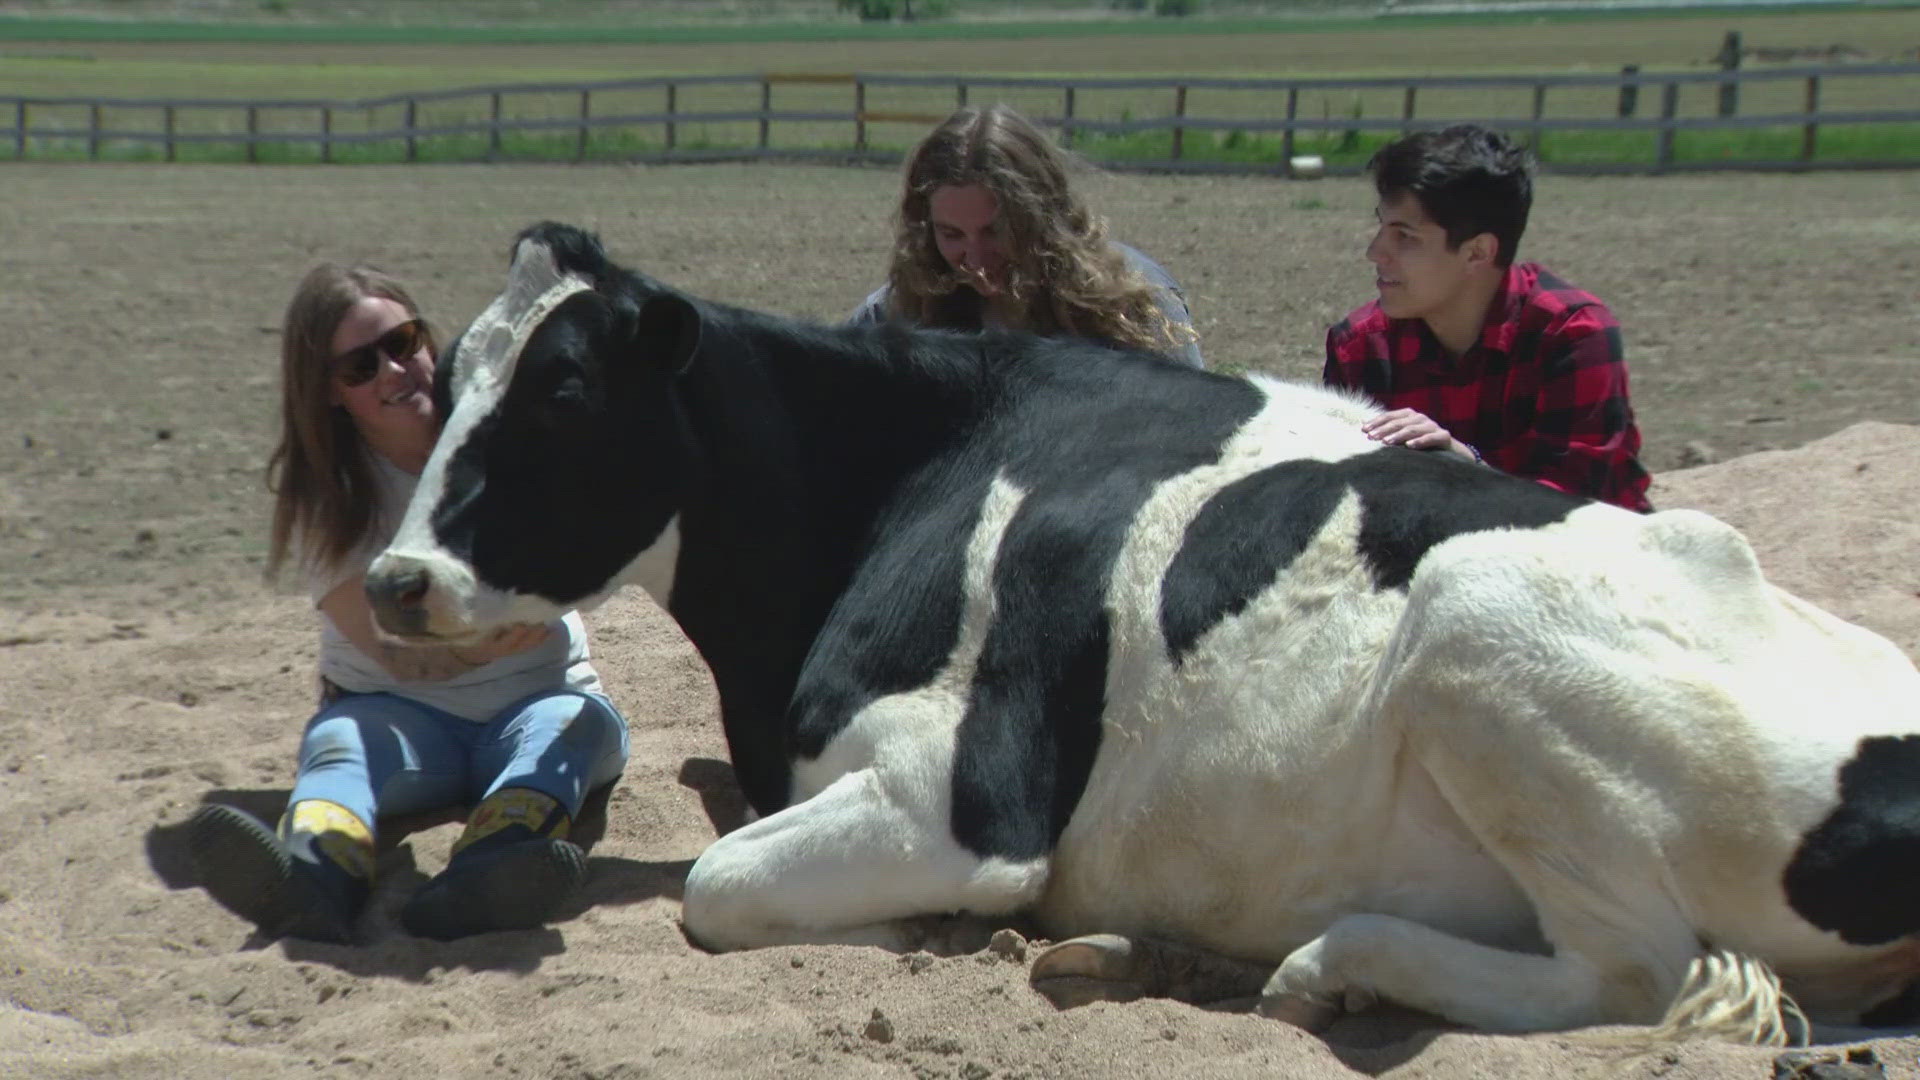 Luvin' Arms Animal Sanctuary launched its Cow Cuddle Experience last summer but has seen a dramatic increase in interest this summer, according to Lanette Cook.